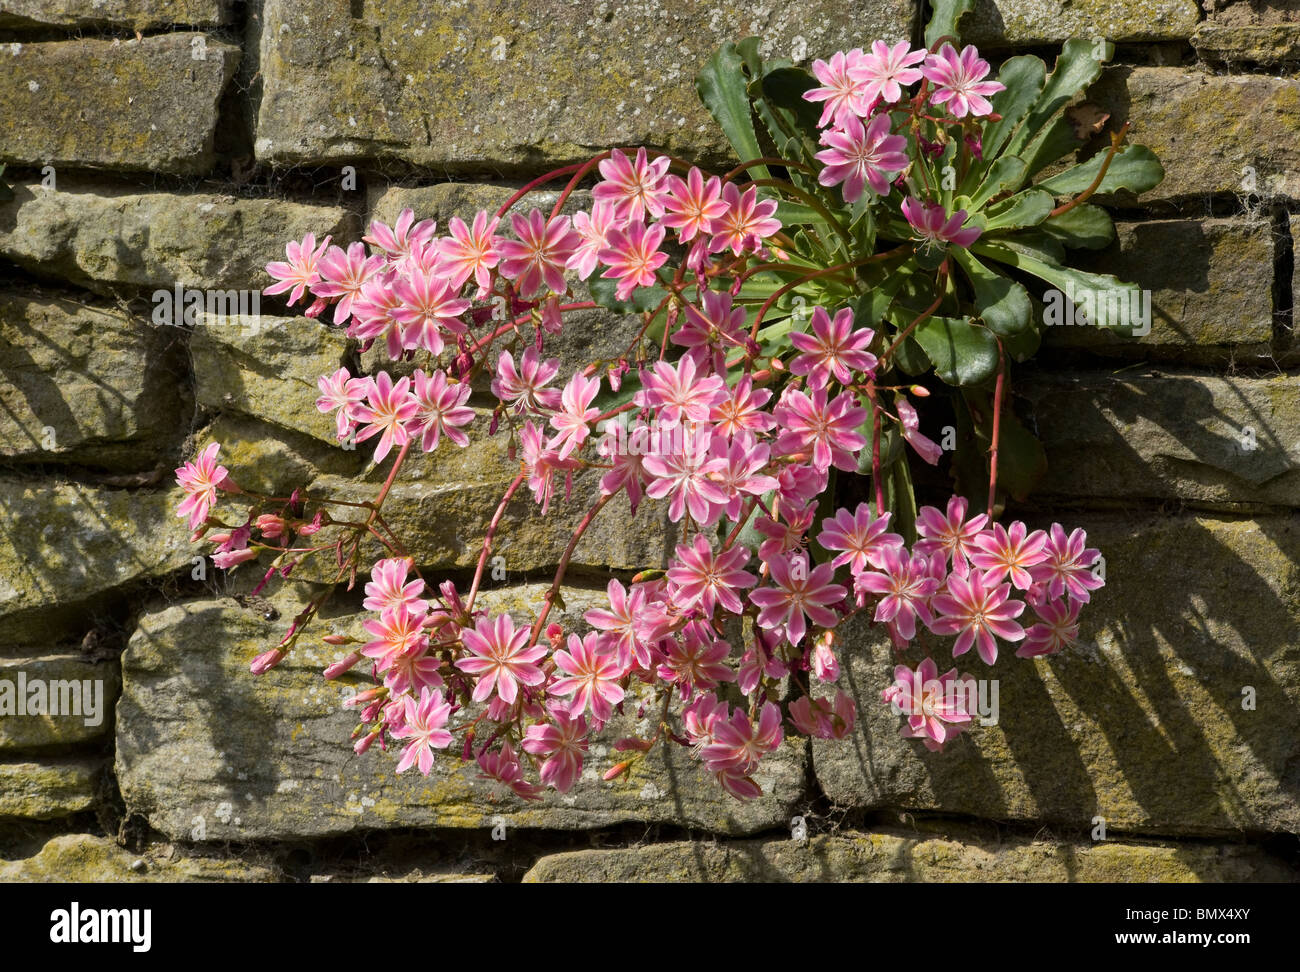 Lewisia cotyledon growing from a crevice in a wall in the sun Stock Photo